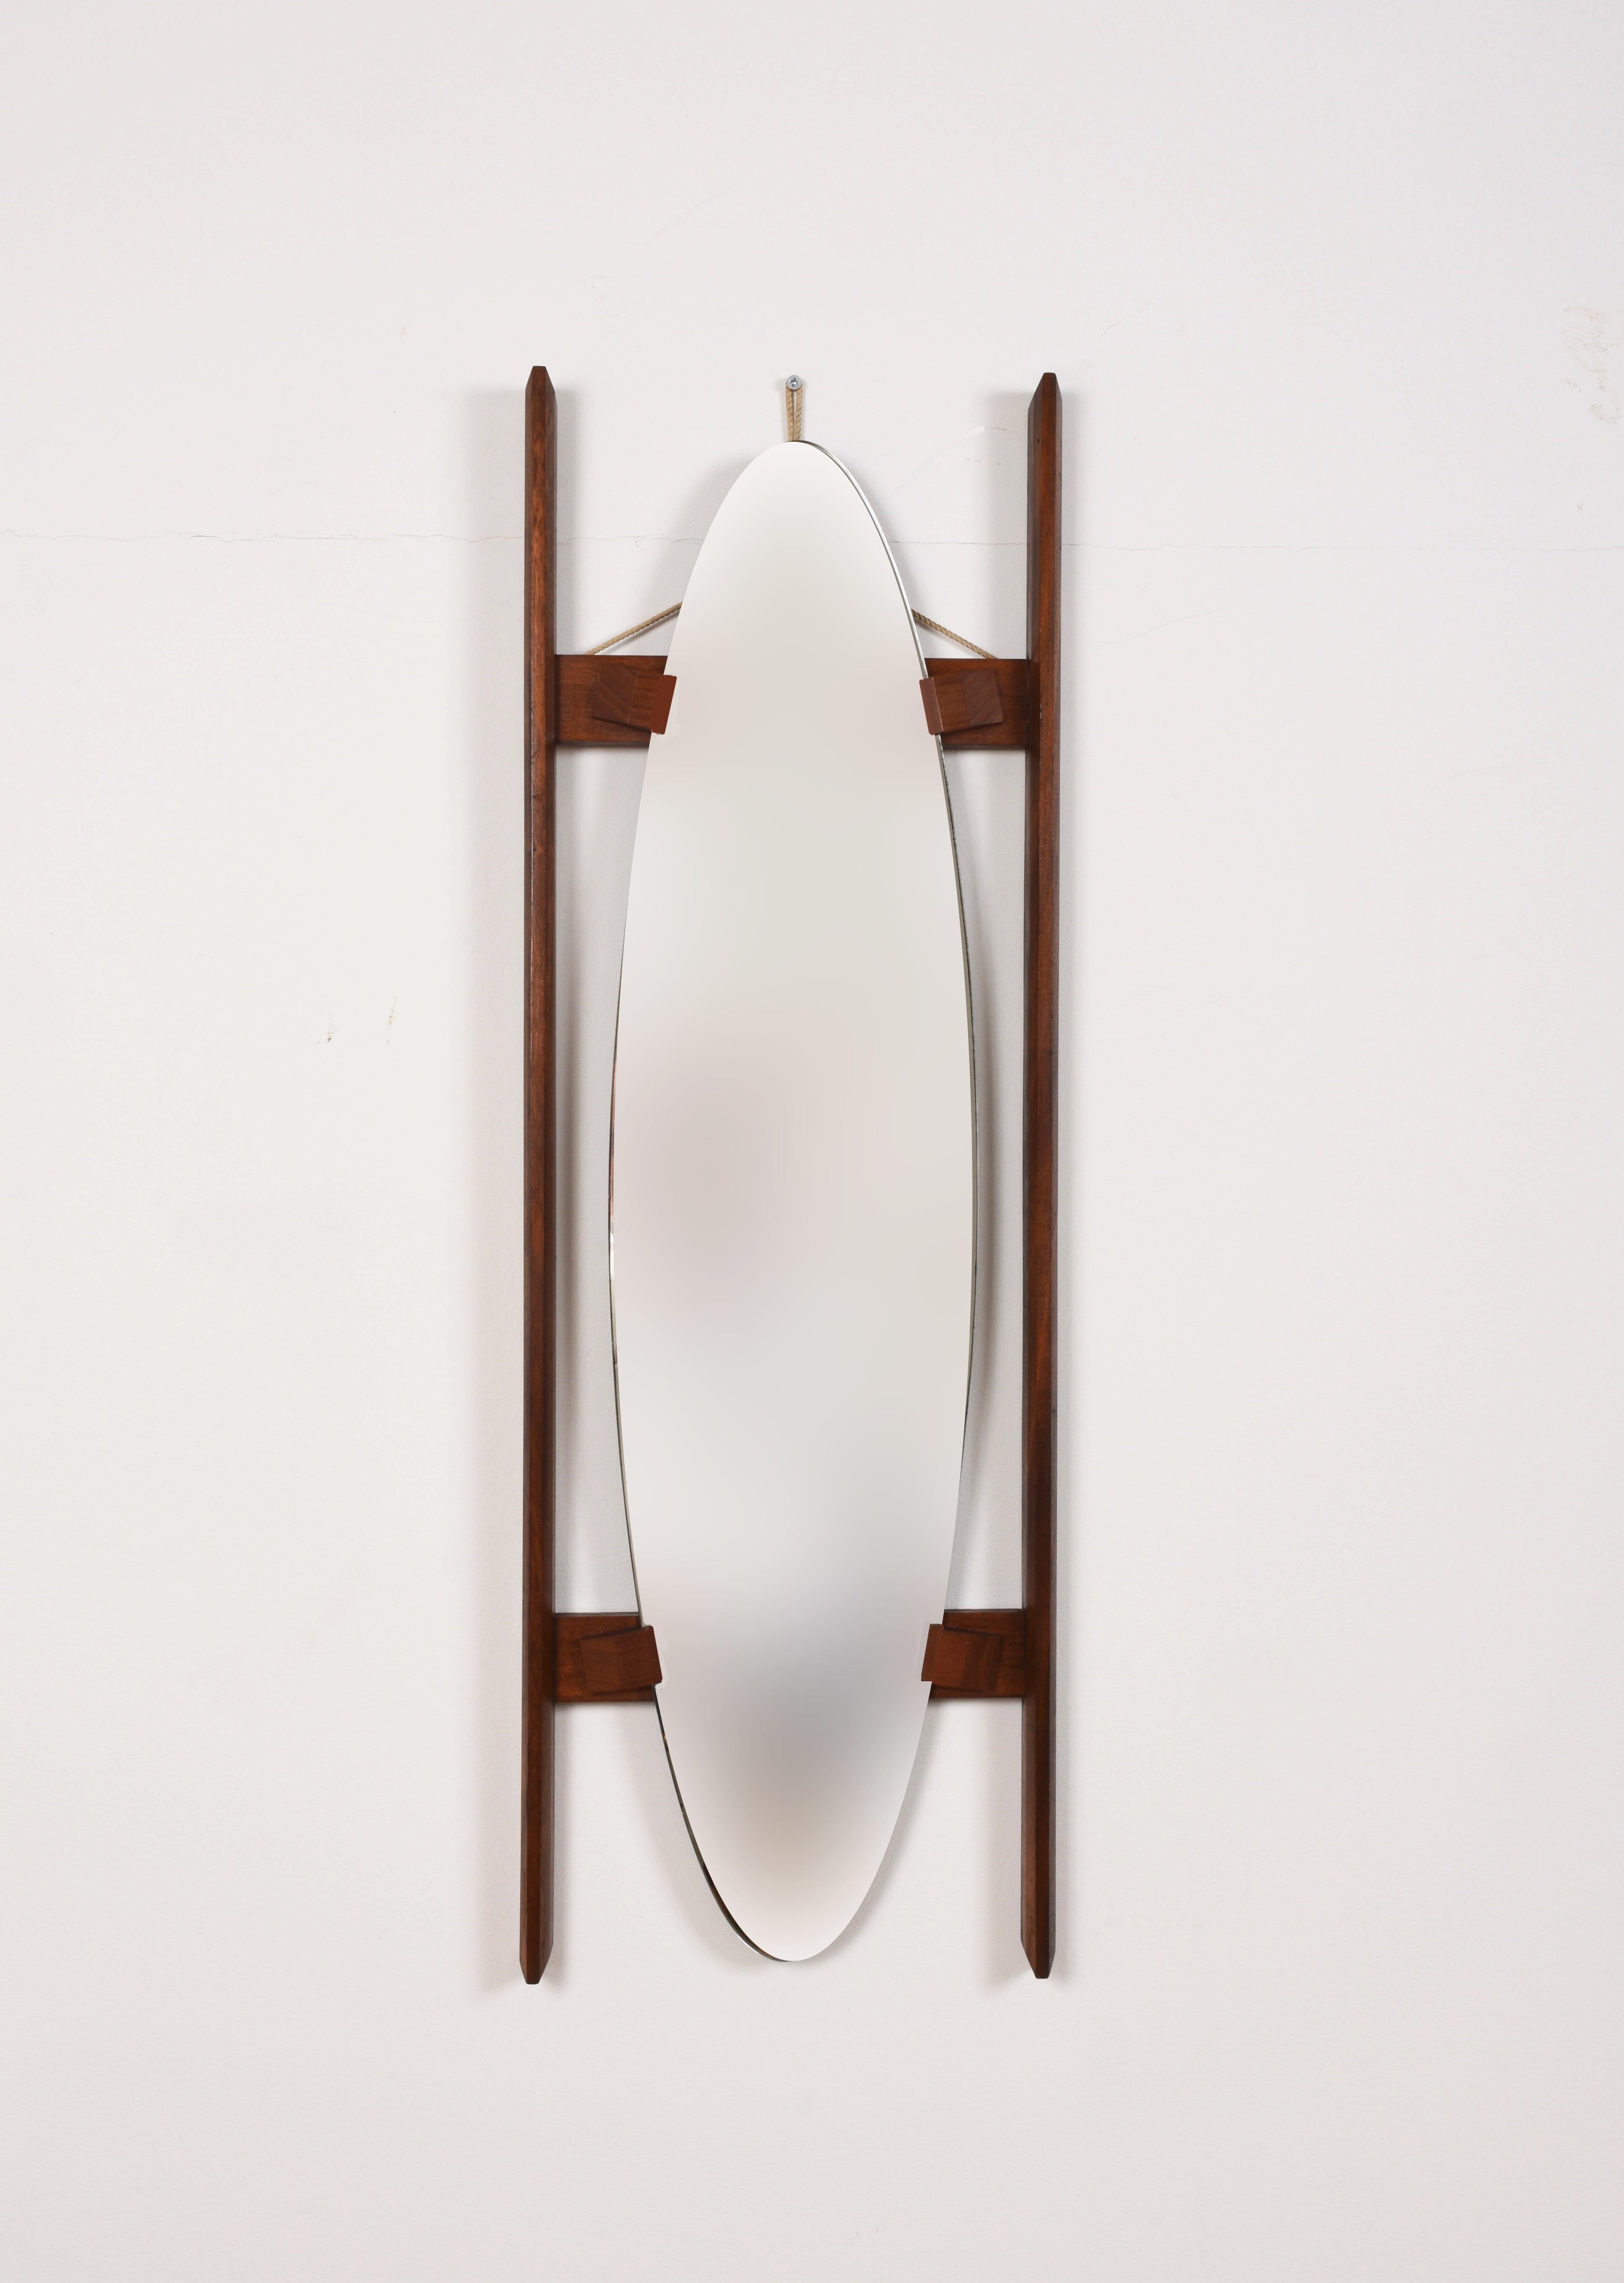 1960s oval mirror, teak structure.
Measurements:
Frame 35 x 105 cm
Mirror 24 x 100 cm

Vintage, signs of use of time.